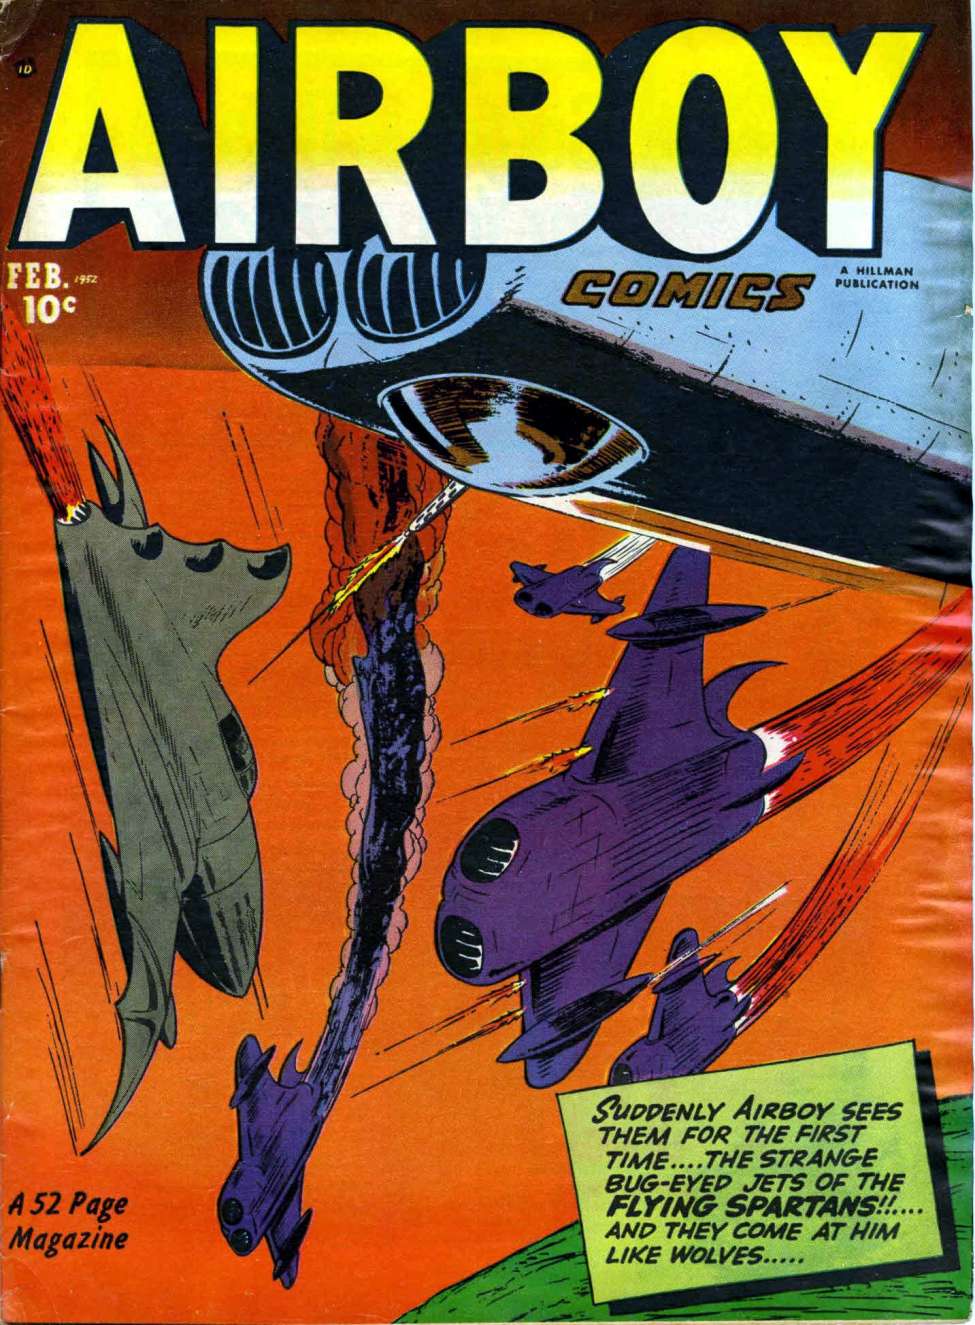 Book Cover For Airboy Comics v9 1